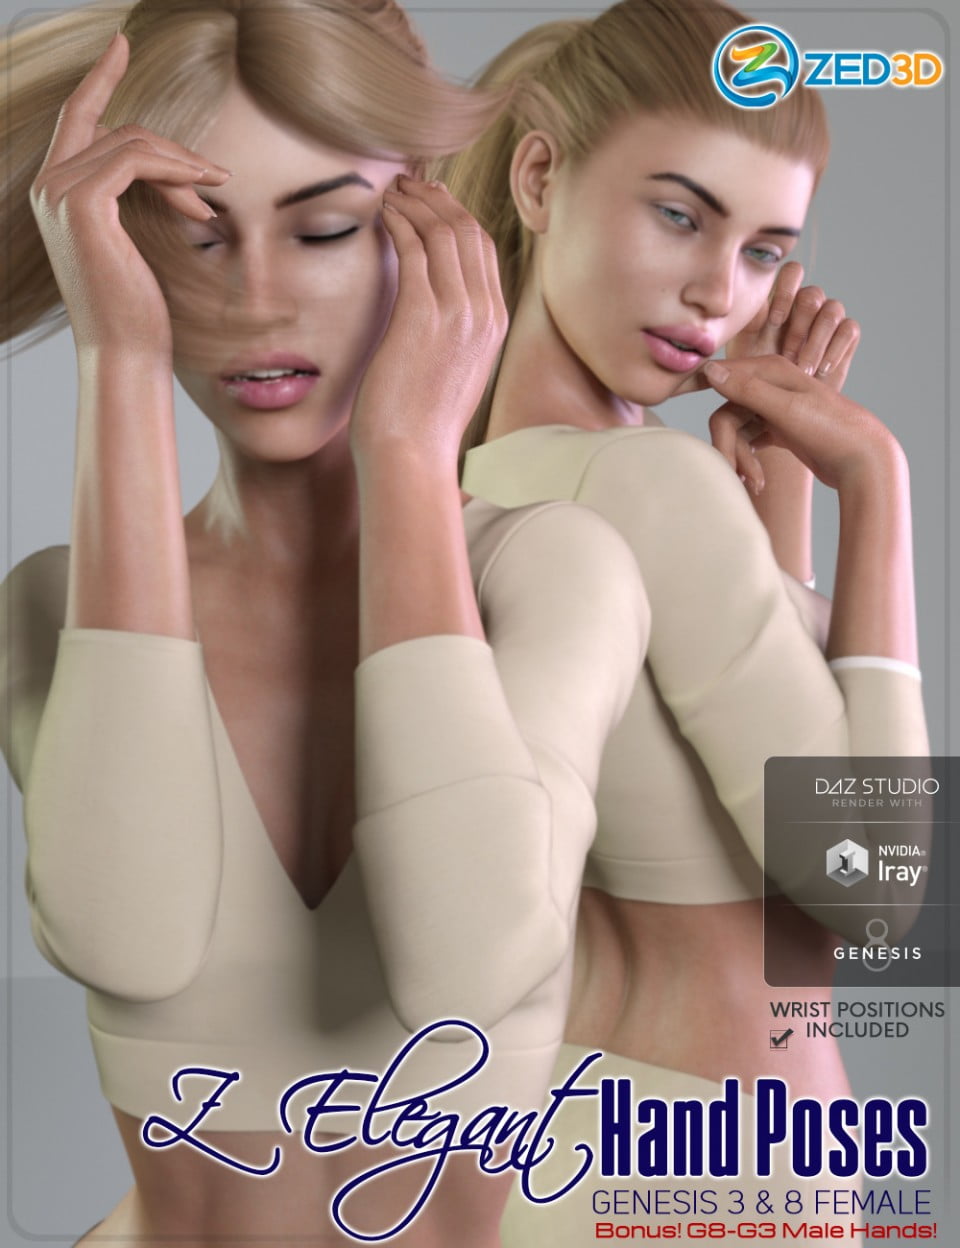 Z Elegant Hand Poses For Genesis 3 And 8 Female And Male 3d Models